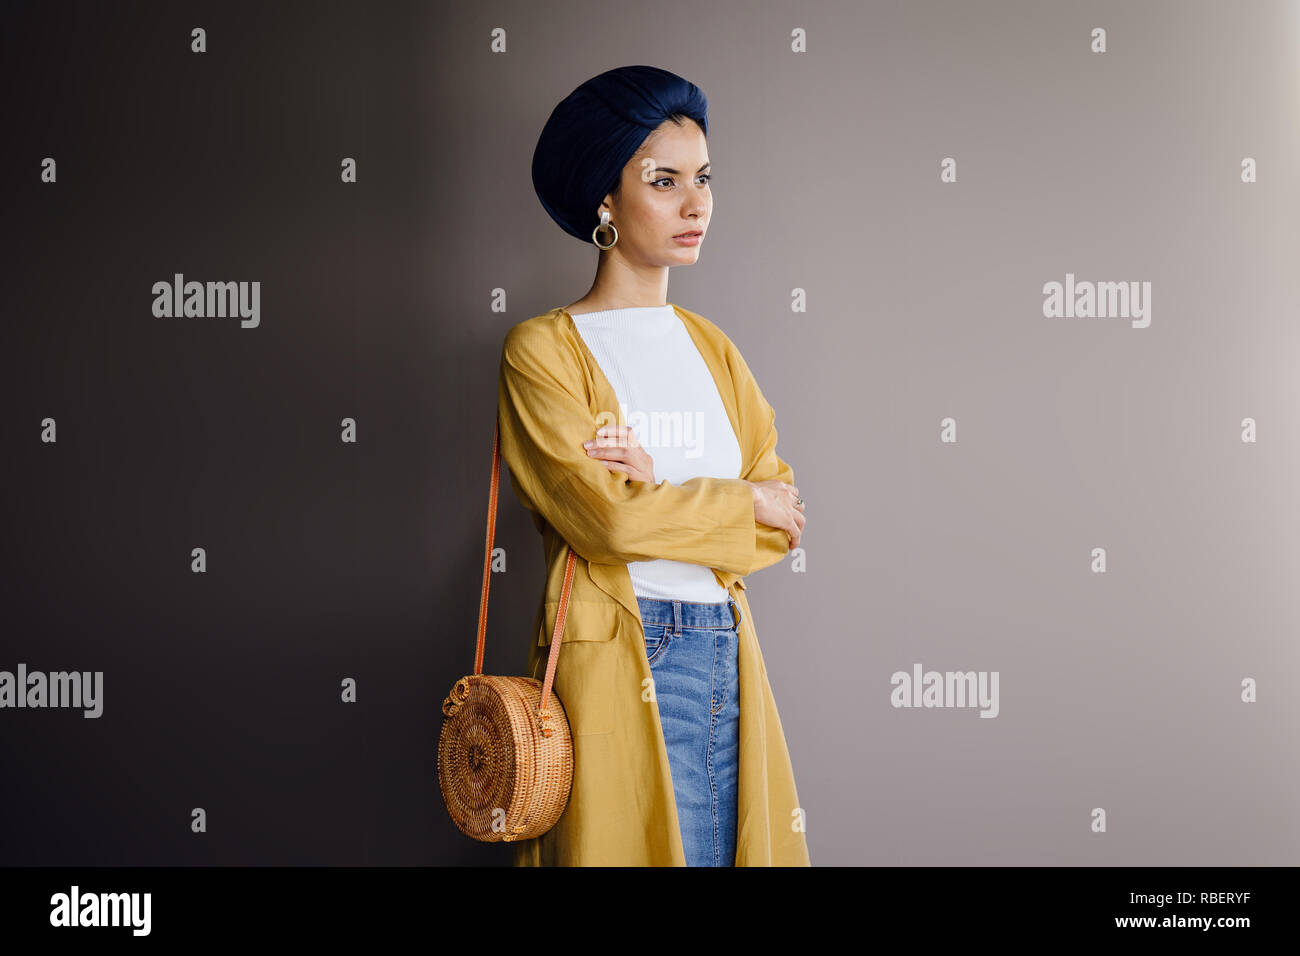 Studio portrait of a young, elegant and beautiful Middle Eastern woman in a turban hijab headscarf and stylish pastel-themed clothing. Stock Photo